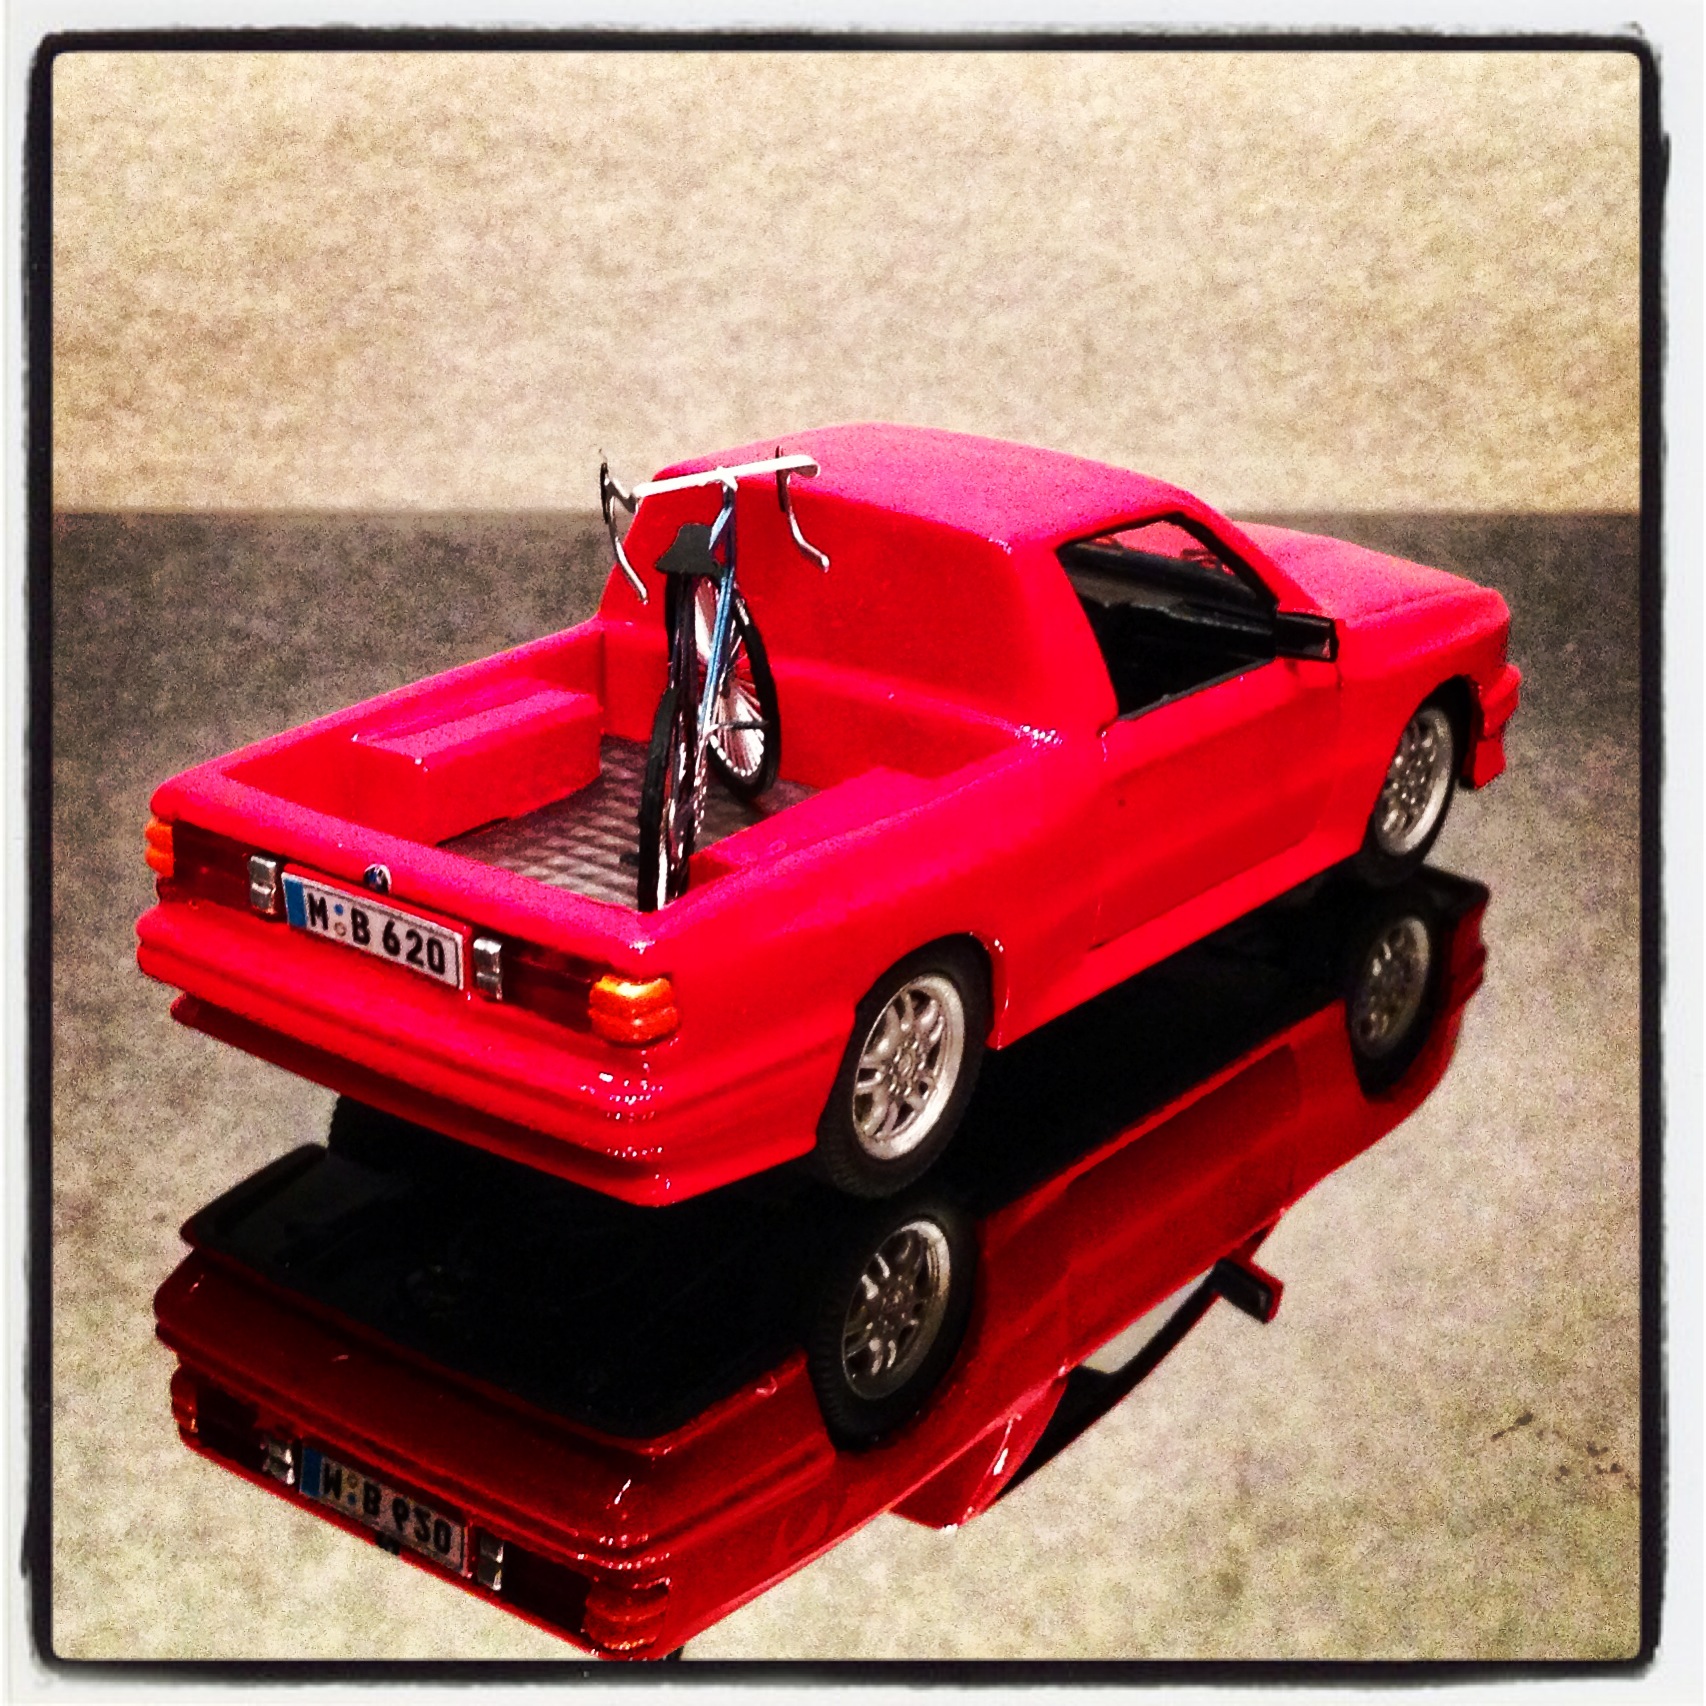 BMW 3 series pick up (E30) with bycicle, red (handmade)